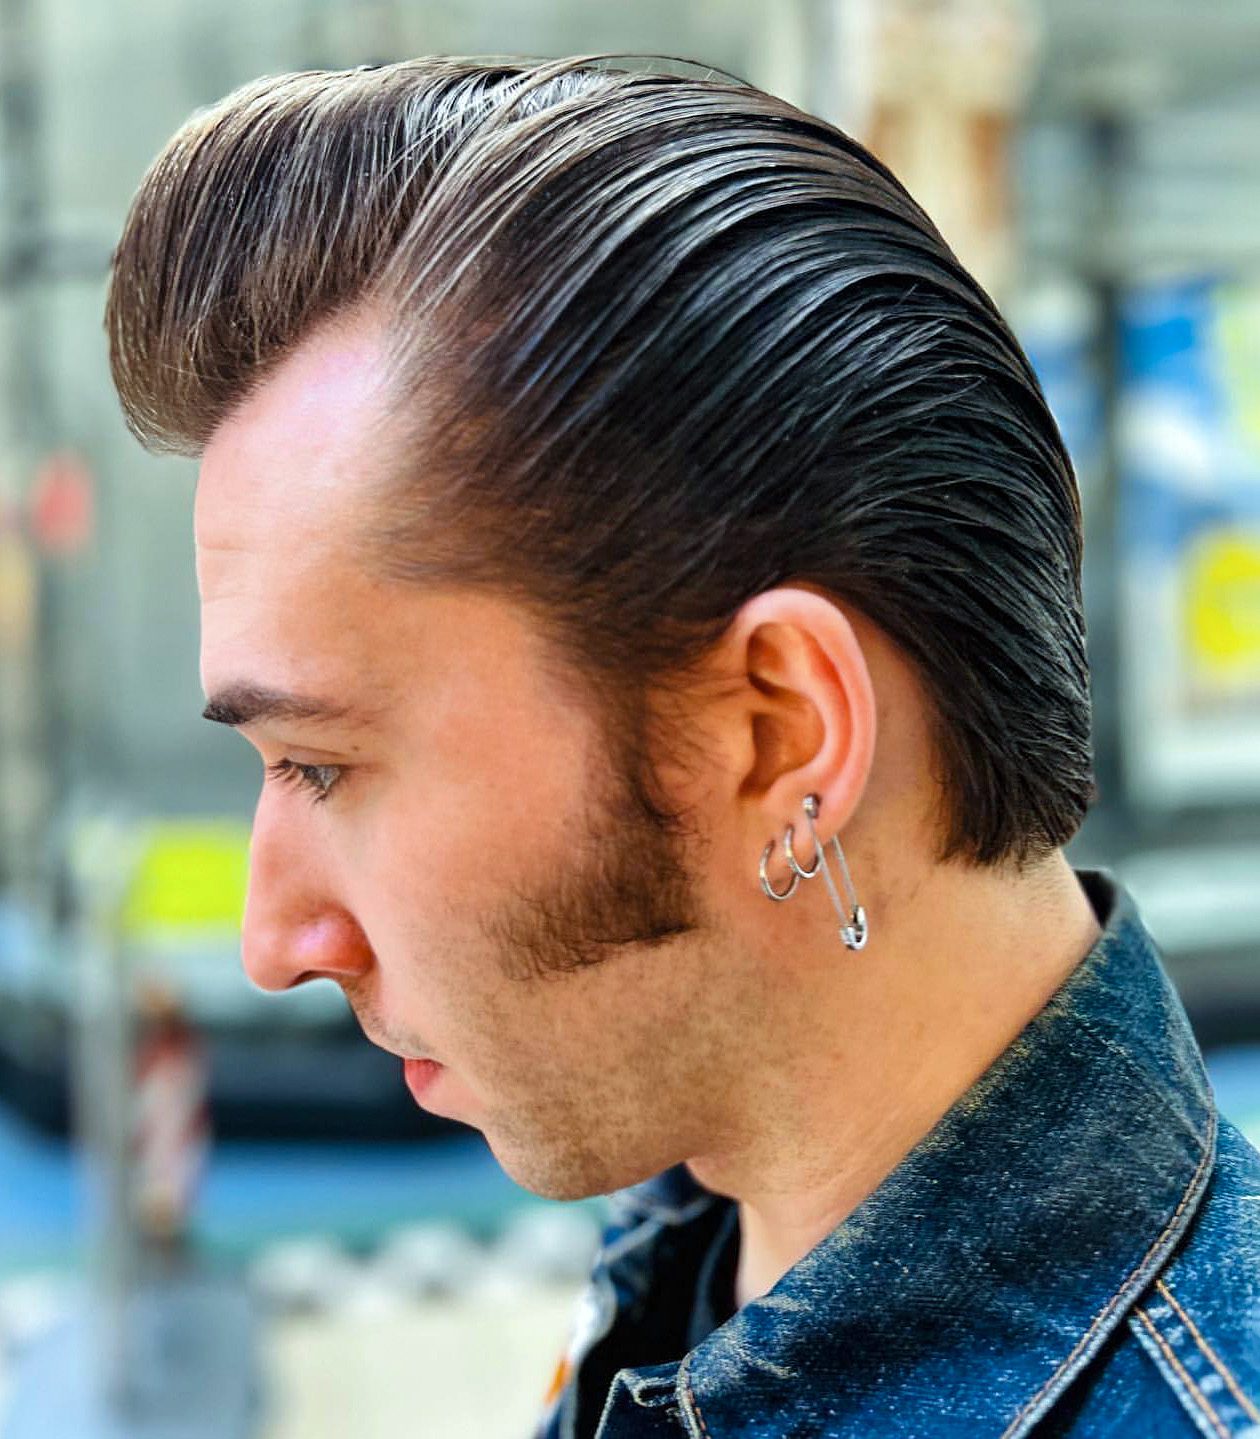 Elvis Cut with Short L-shaped Sideburns